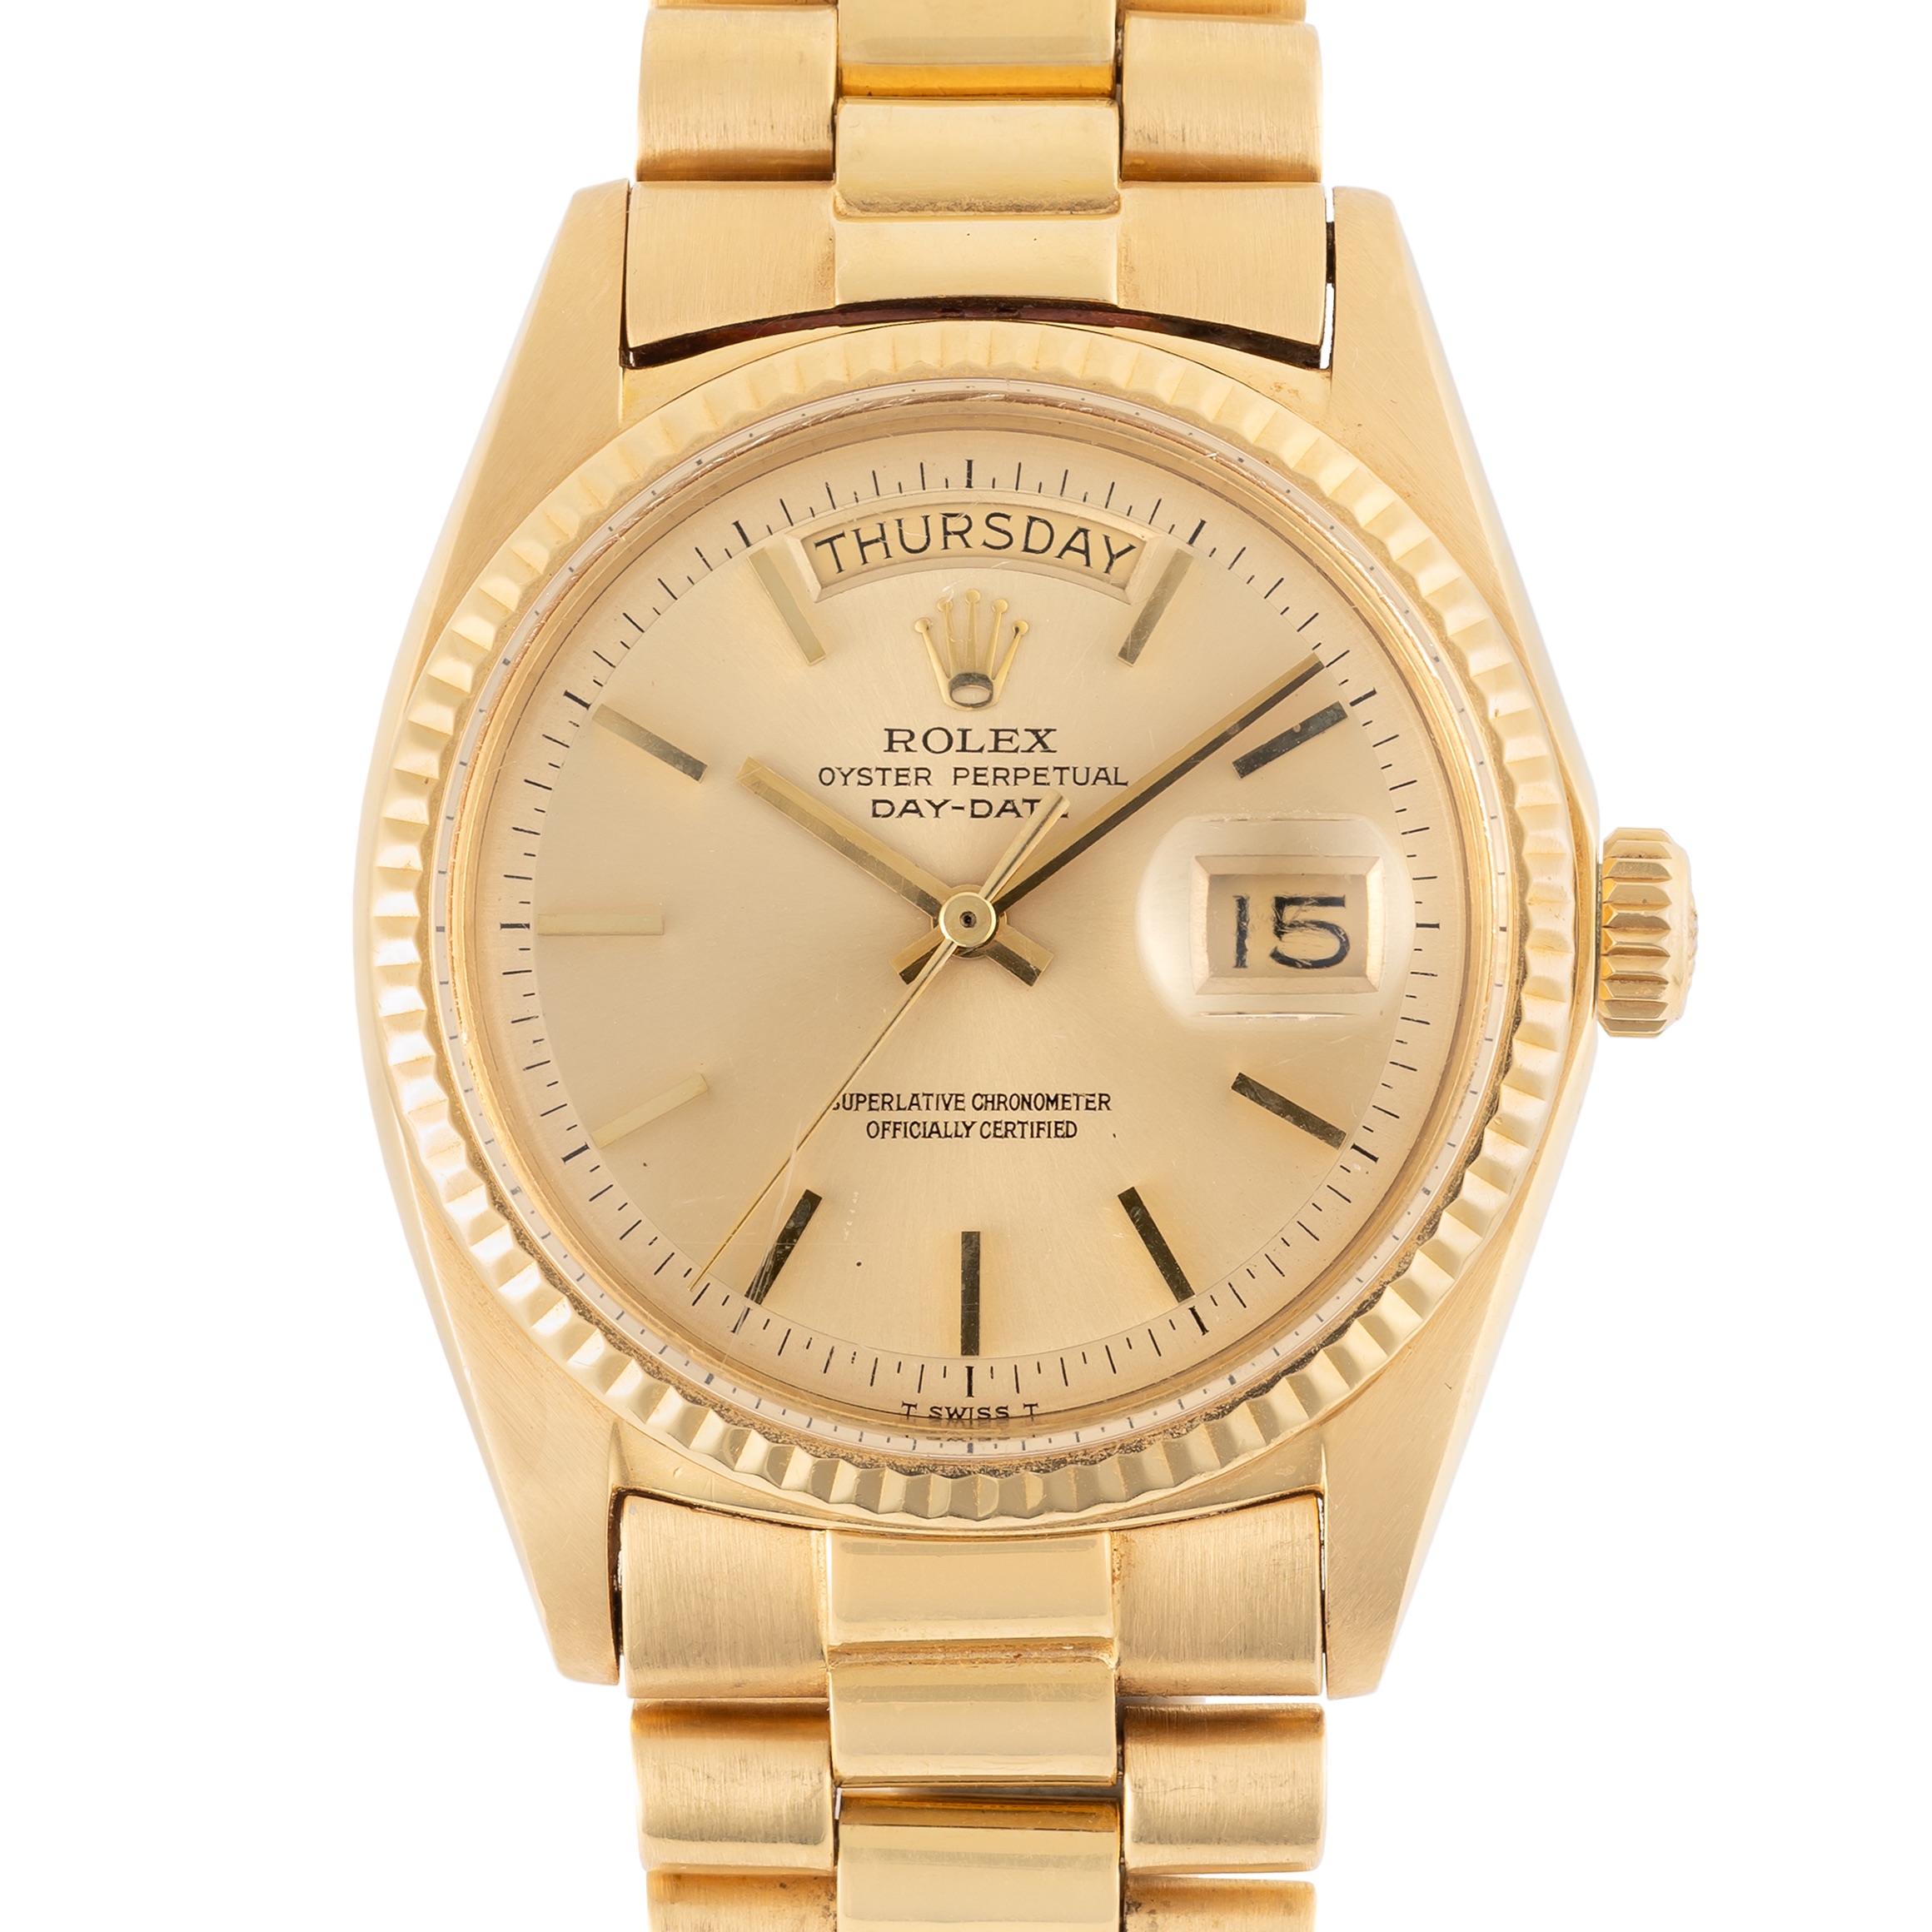 A GENTLEMAN'S SIZE 18K SOLID YELLOW GOLD ROLEX OYSTER PERPETUAL DAY DATE BRACELET WATCH CIRCA